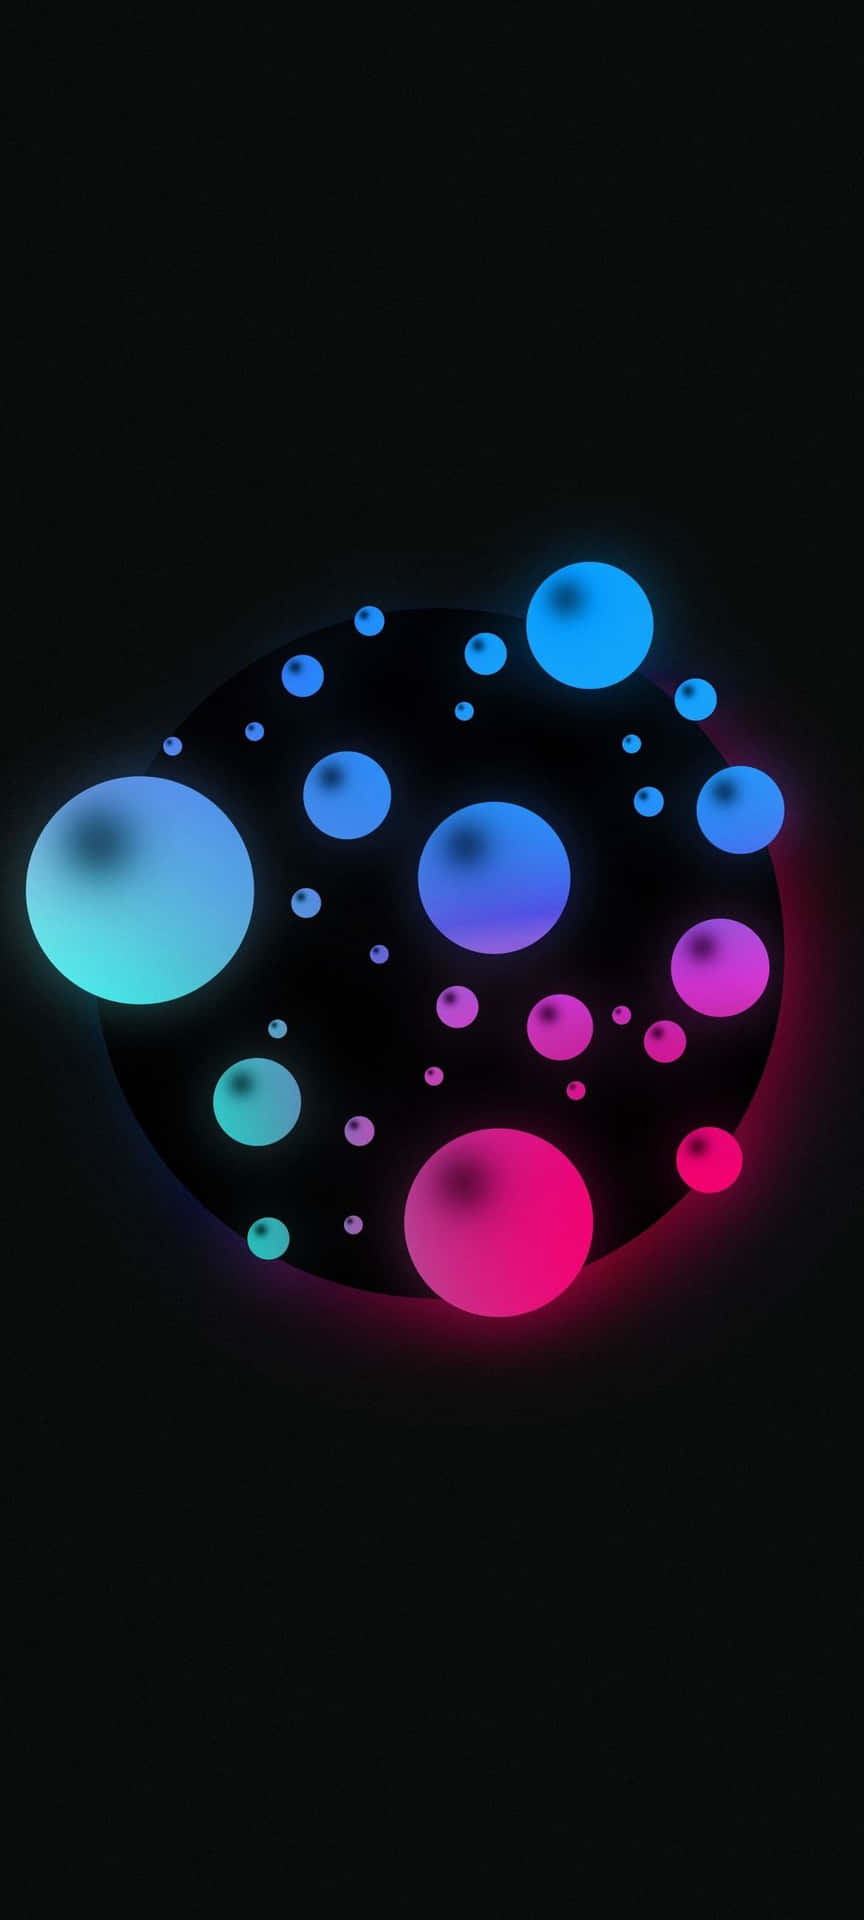 A Circle Of Colorful Bubbles On A Black Background Wallpaper